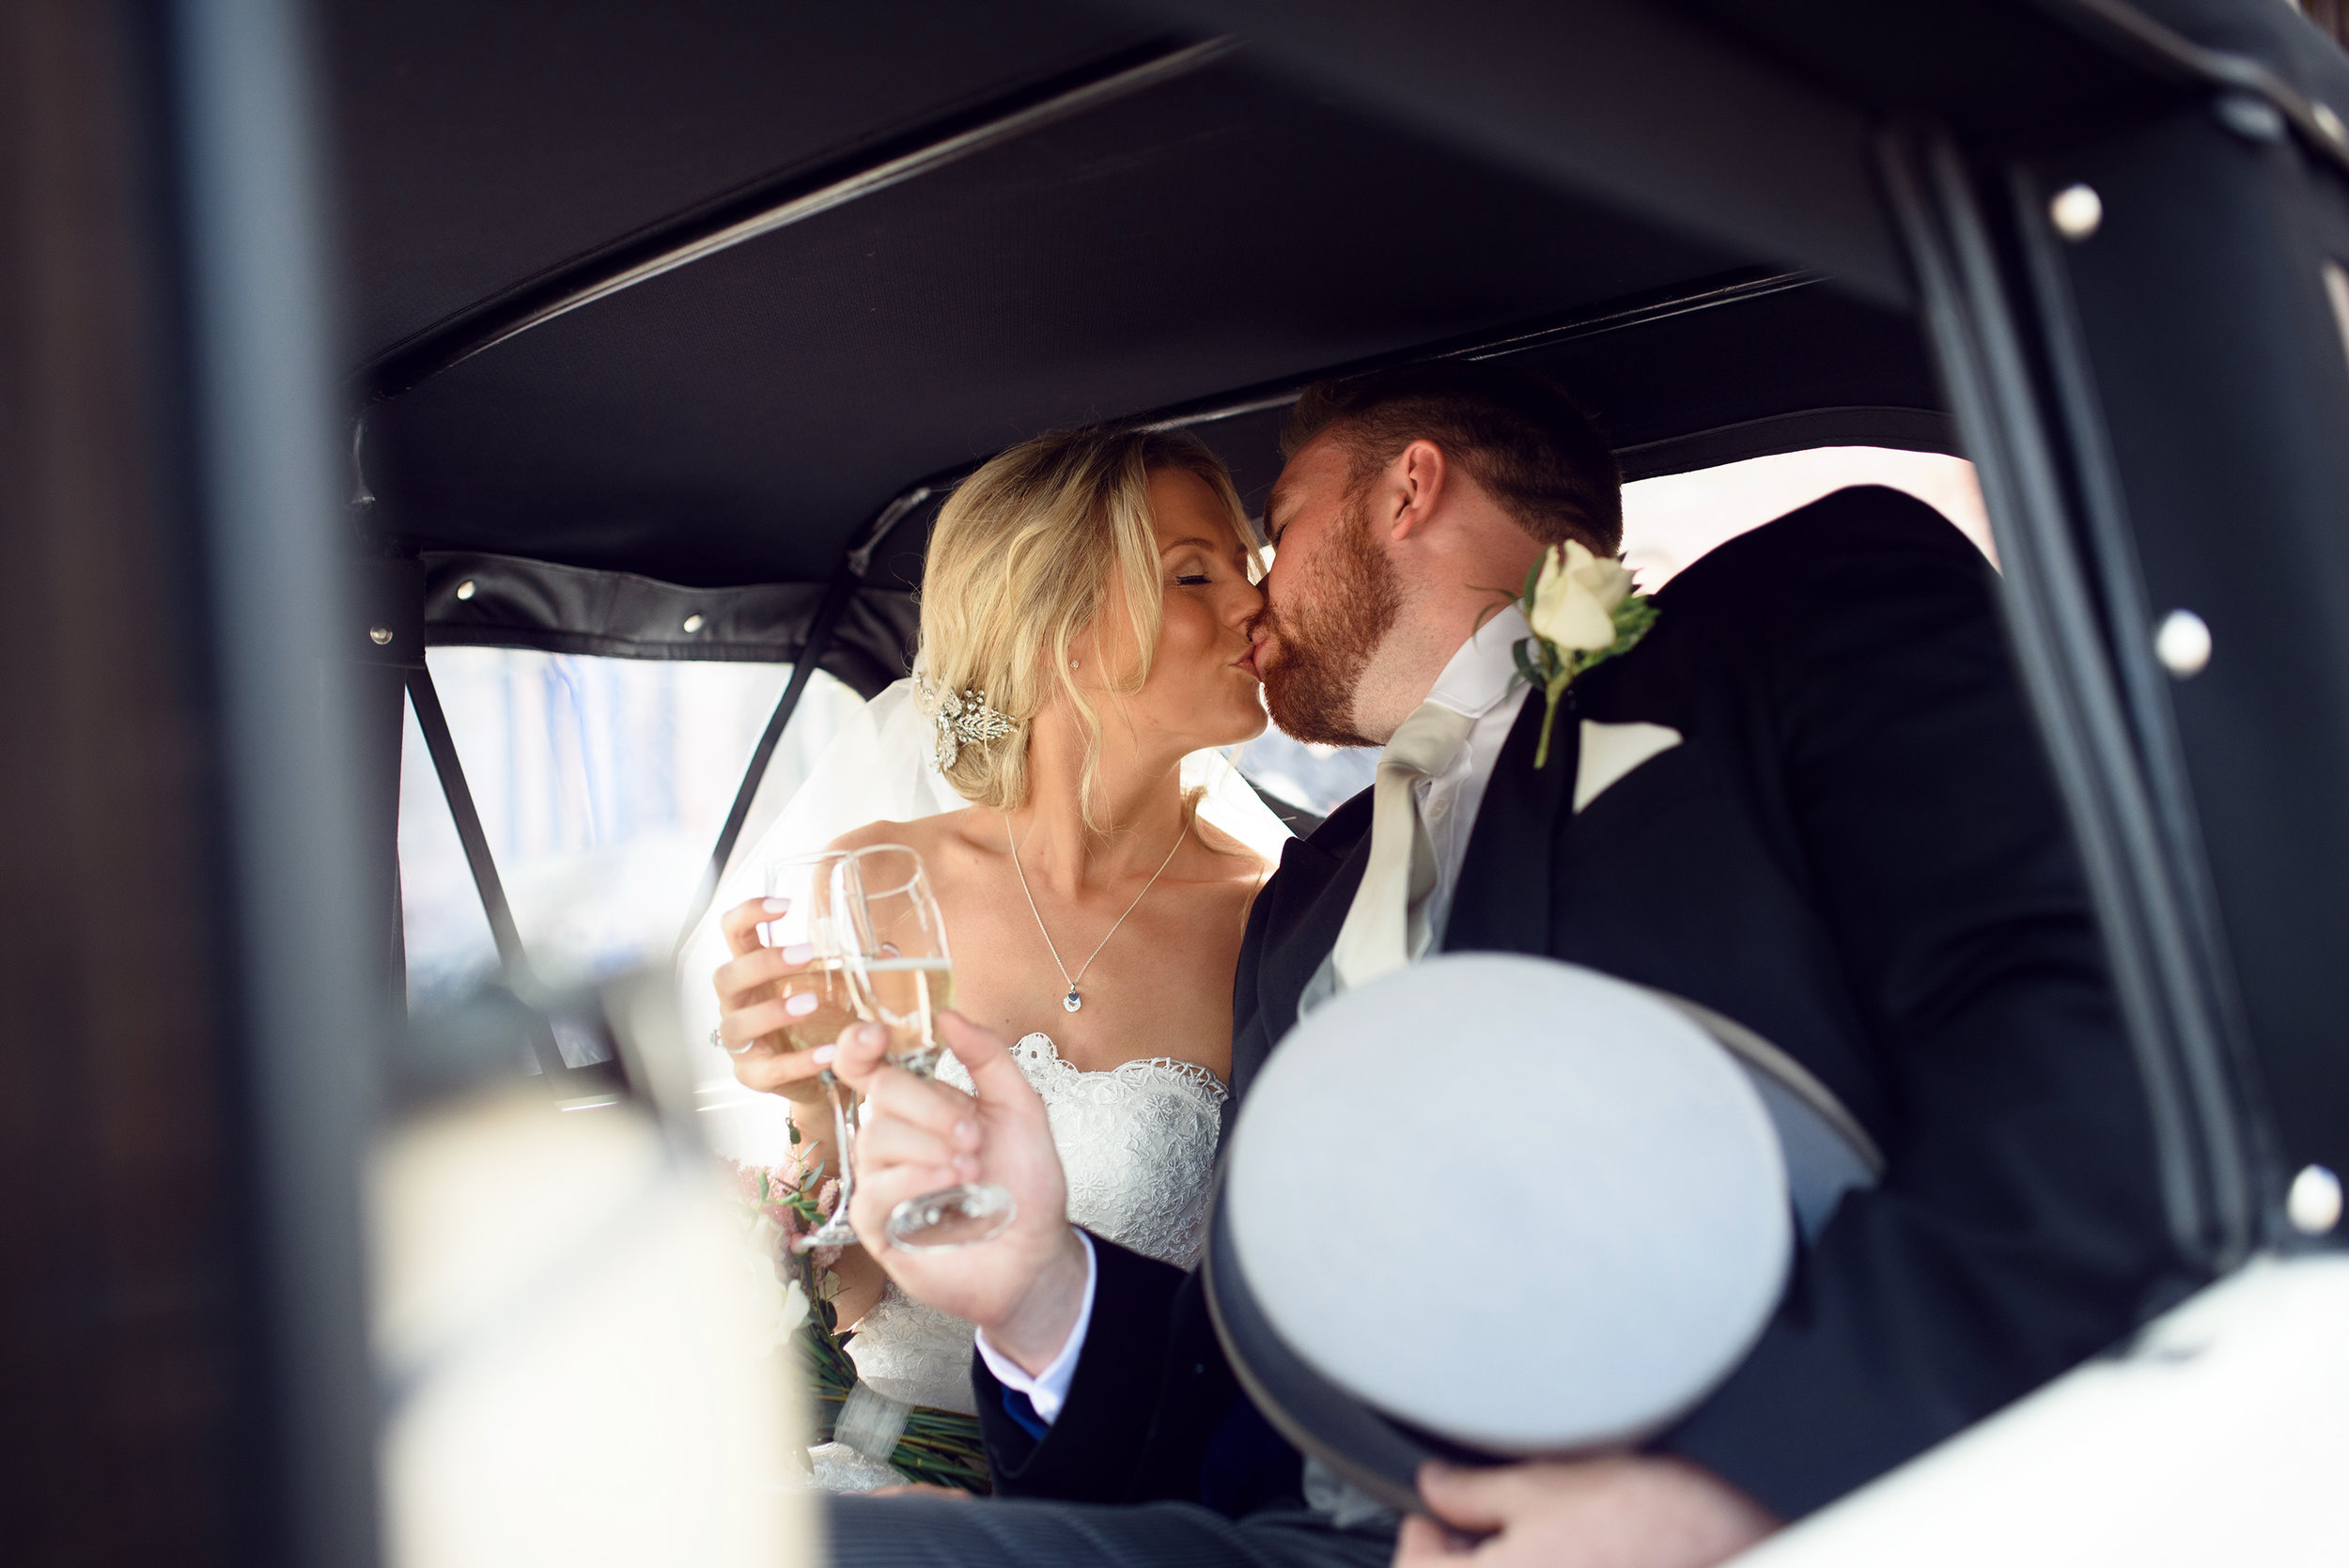 The bride and groom kissing in the back of the car